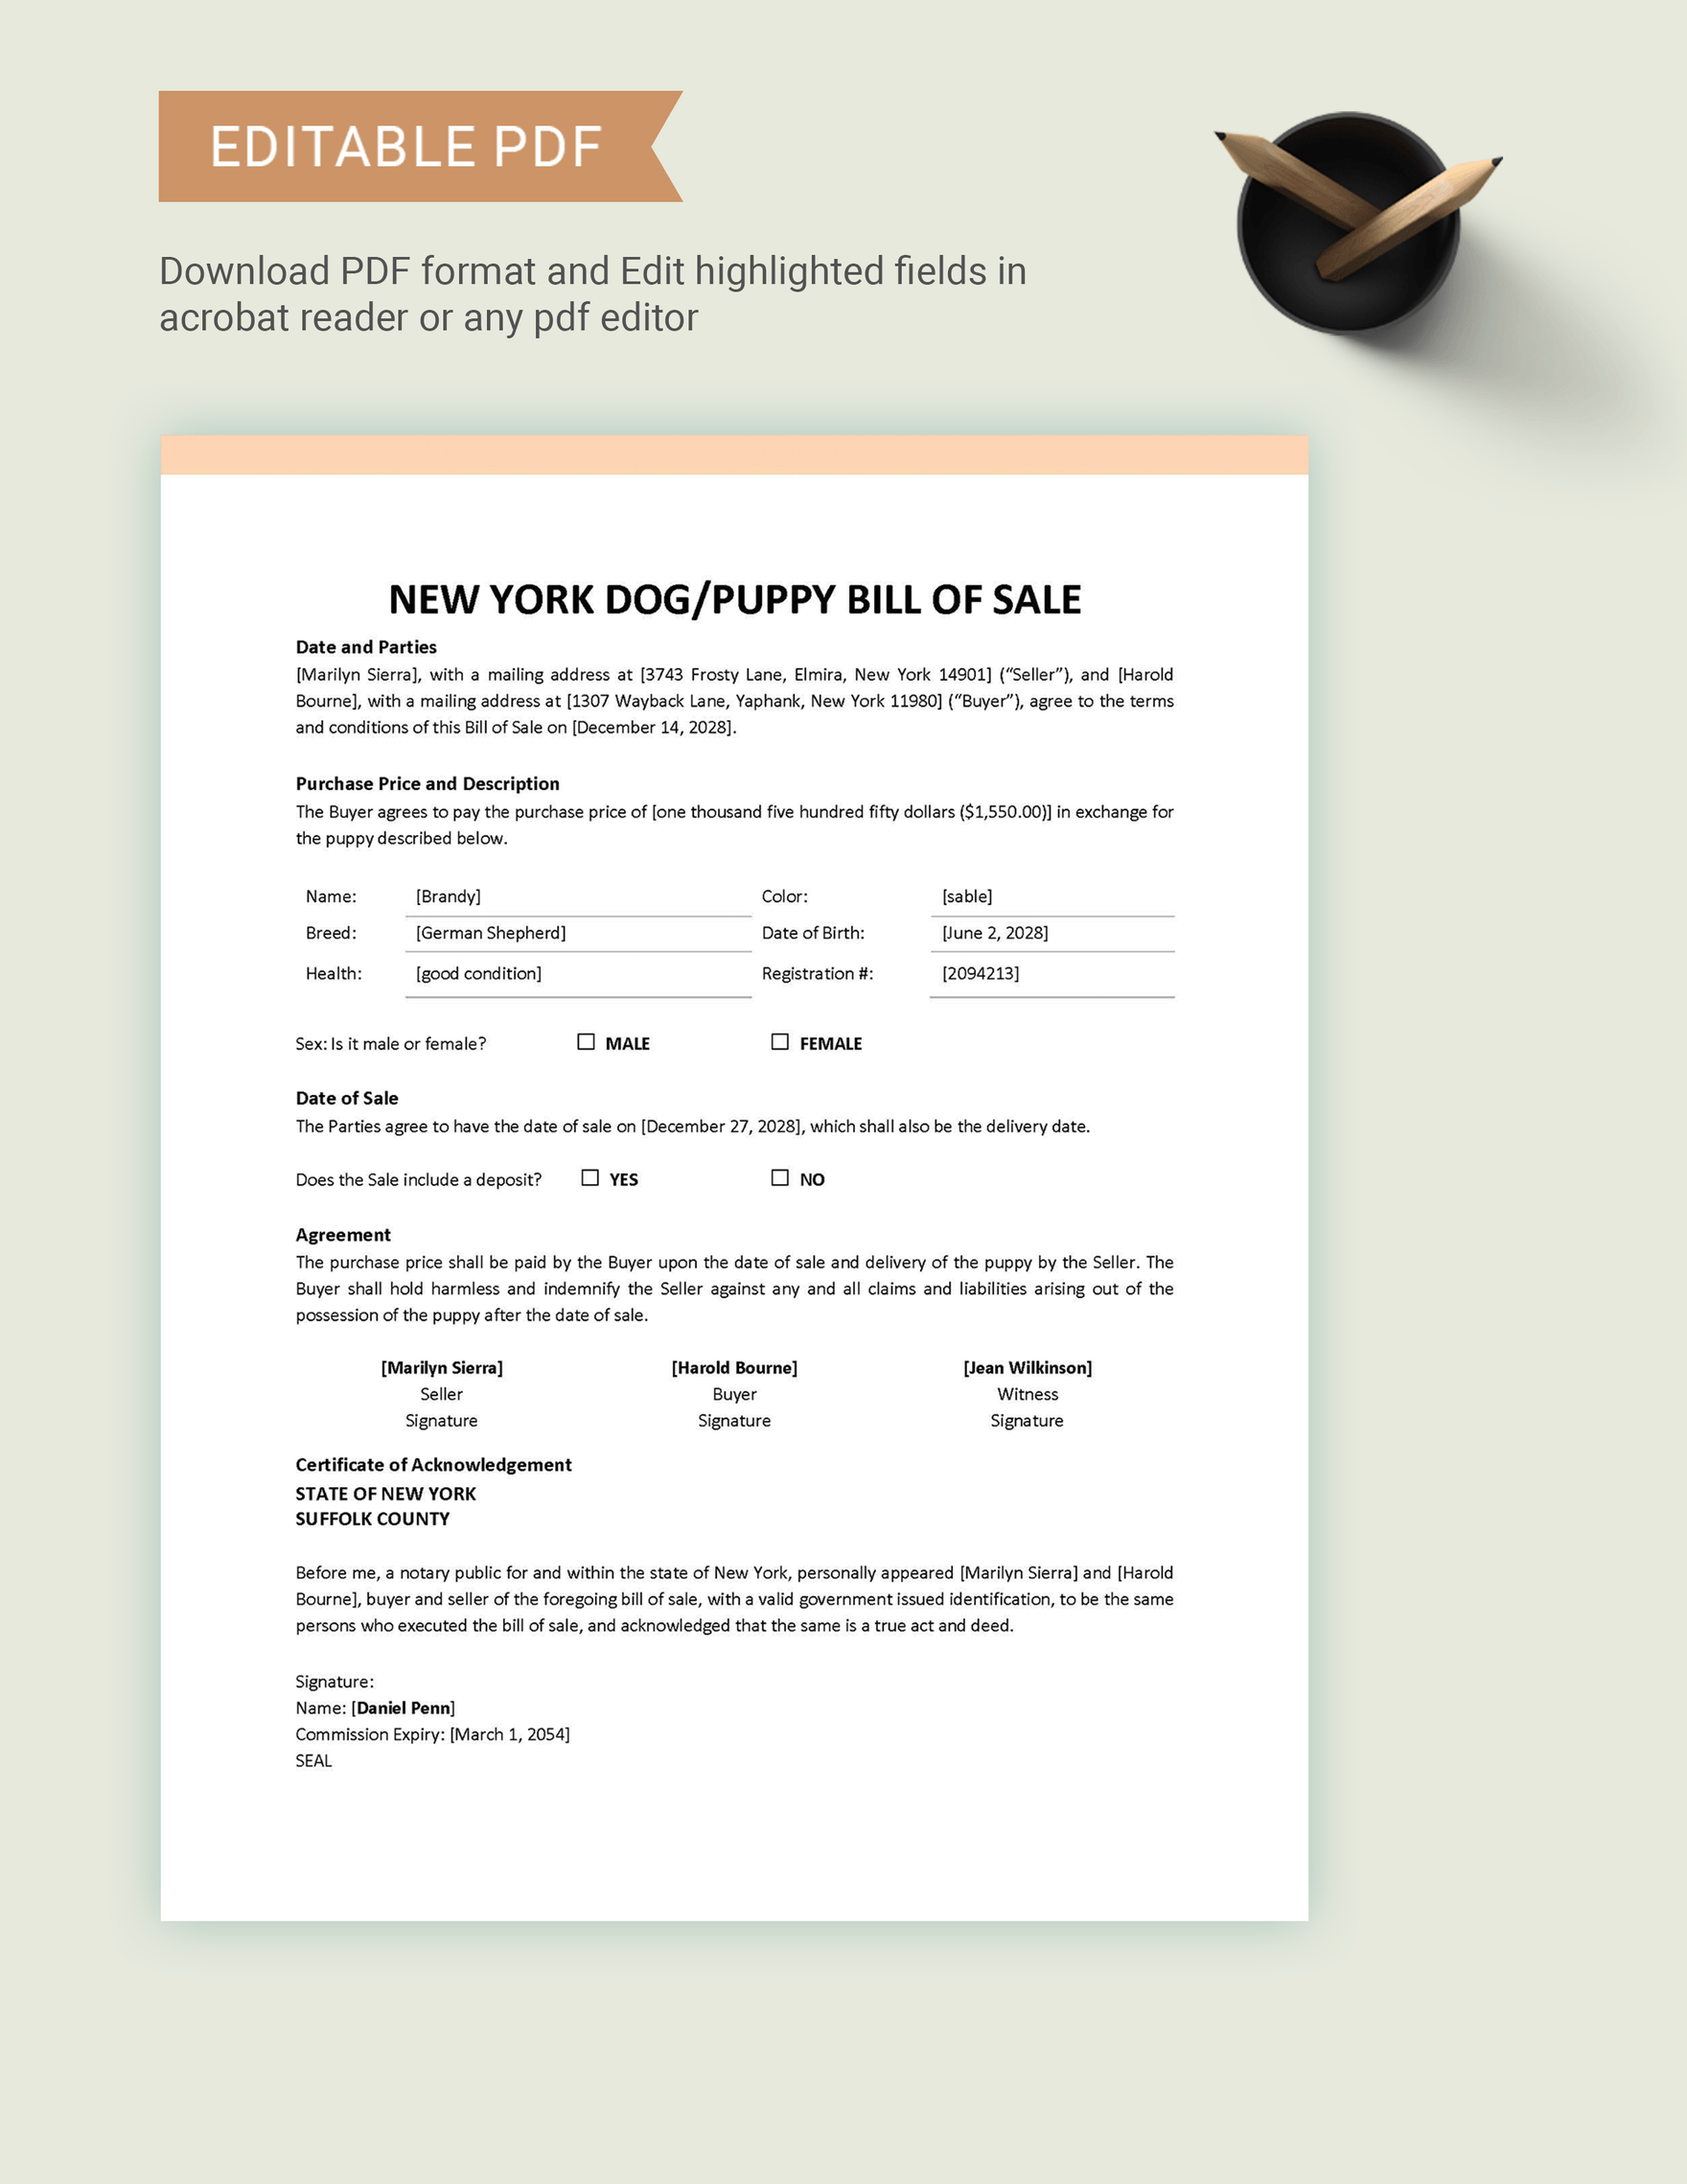 New York Dog / Puppy Bill of Sale Template